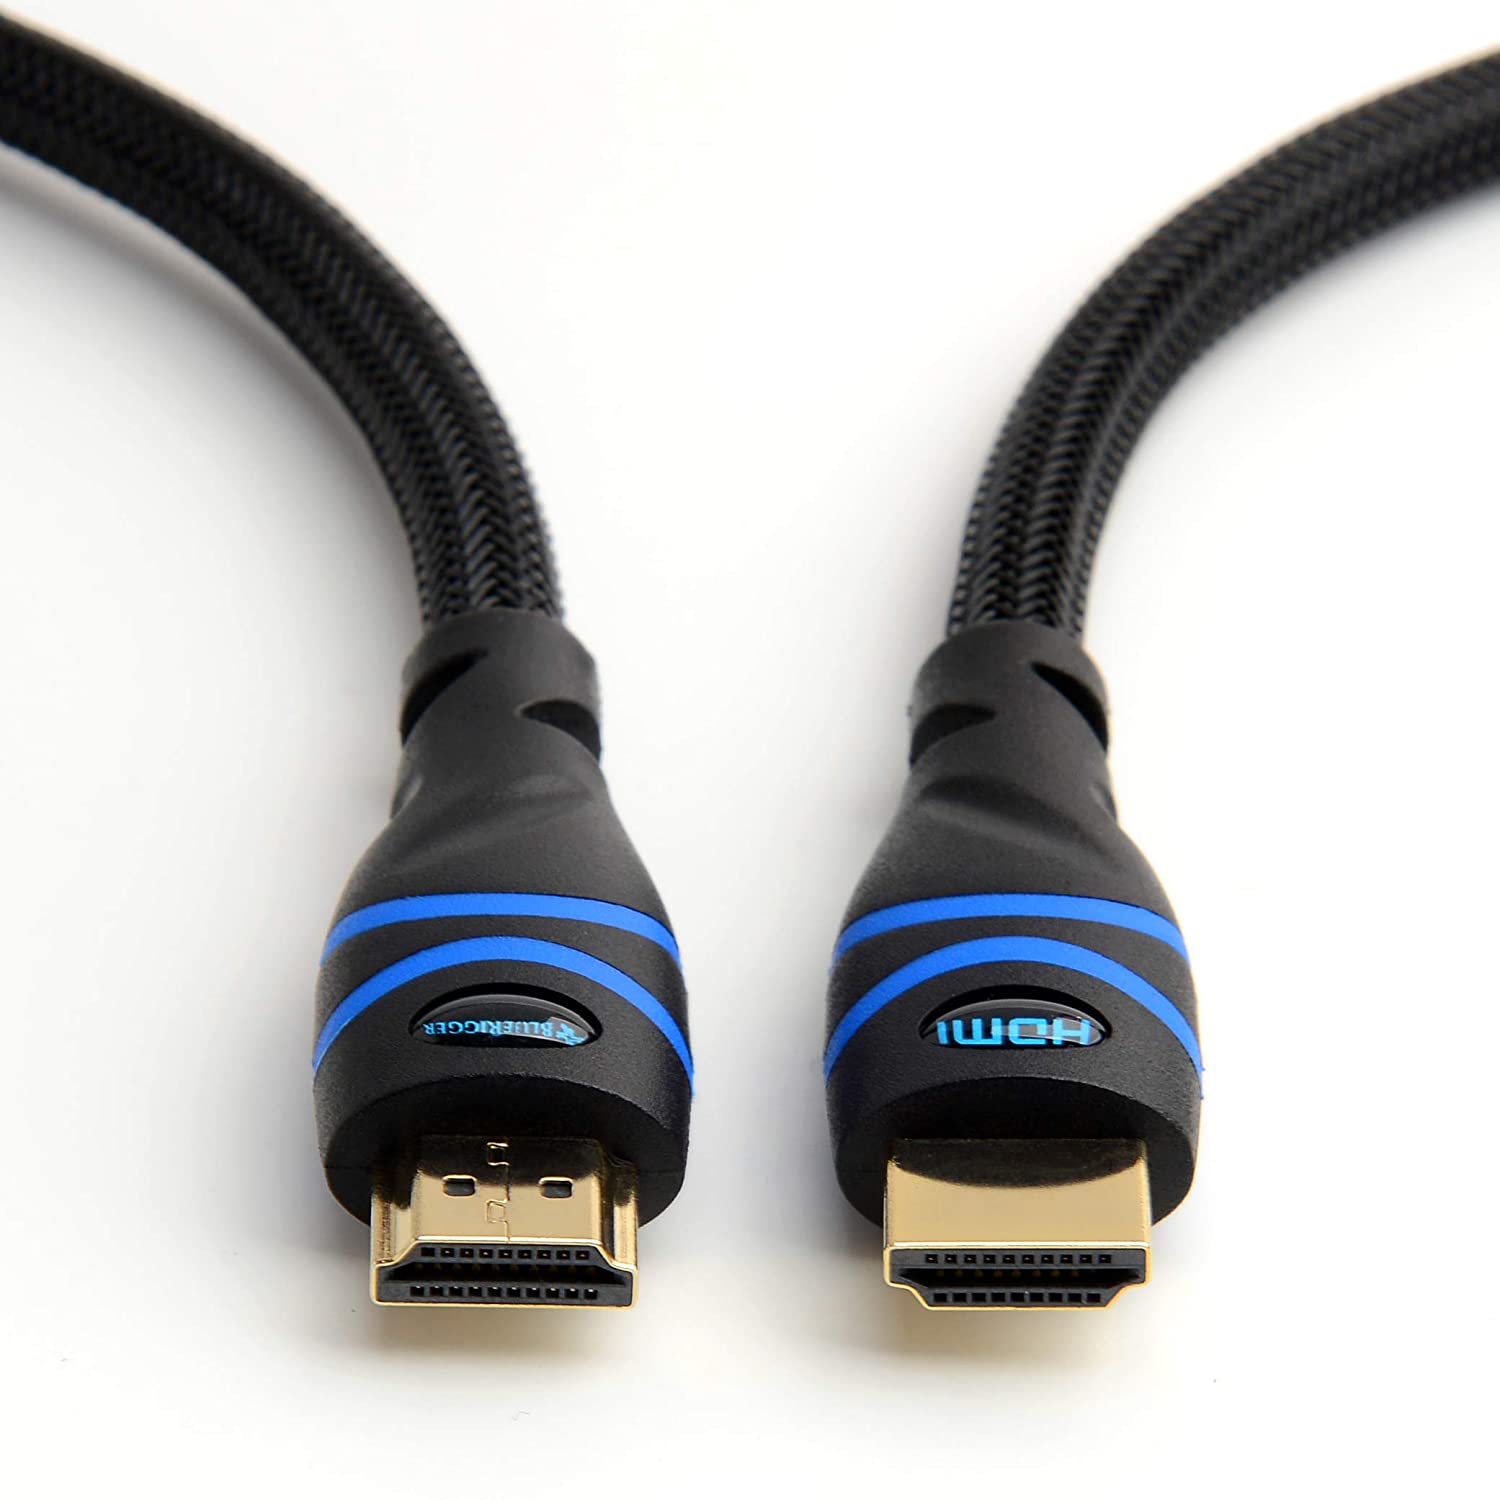 4K HDMI Cable by BlueRigger